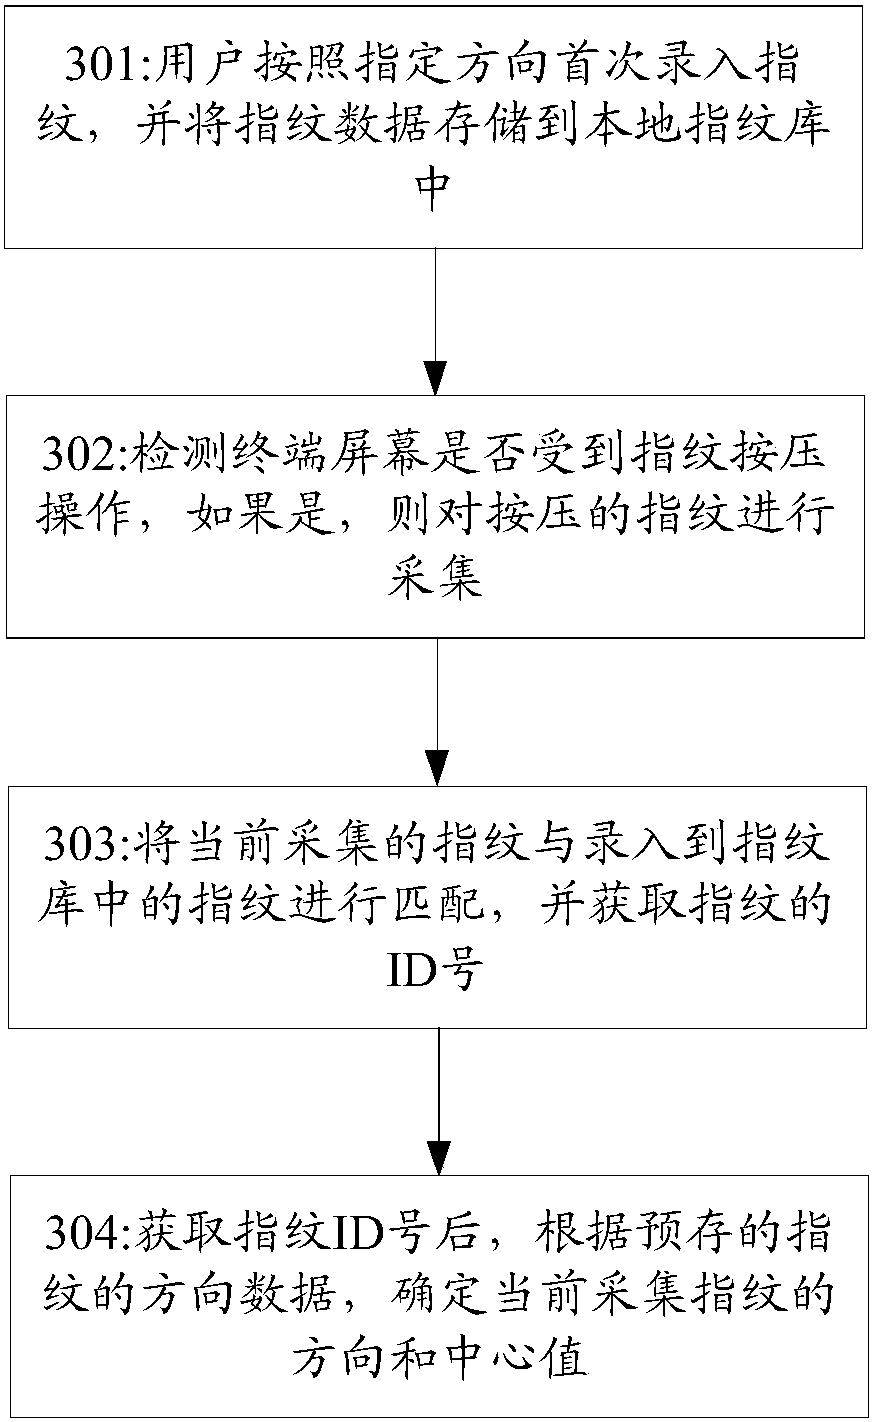 Method and device for intelligently invoking desktop layout